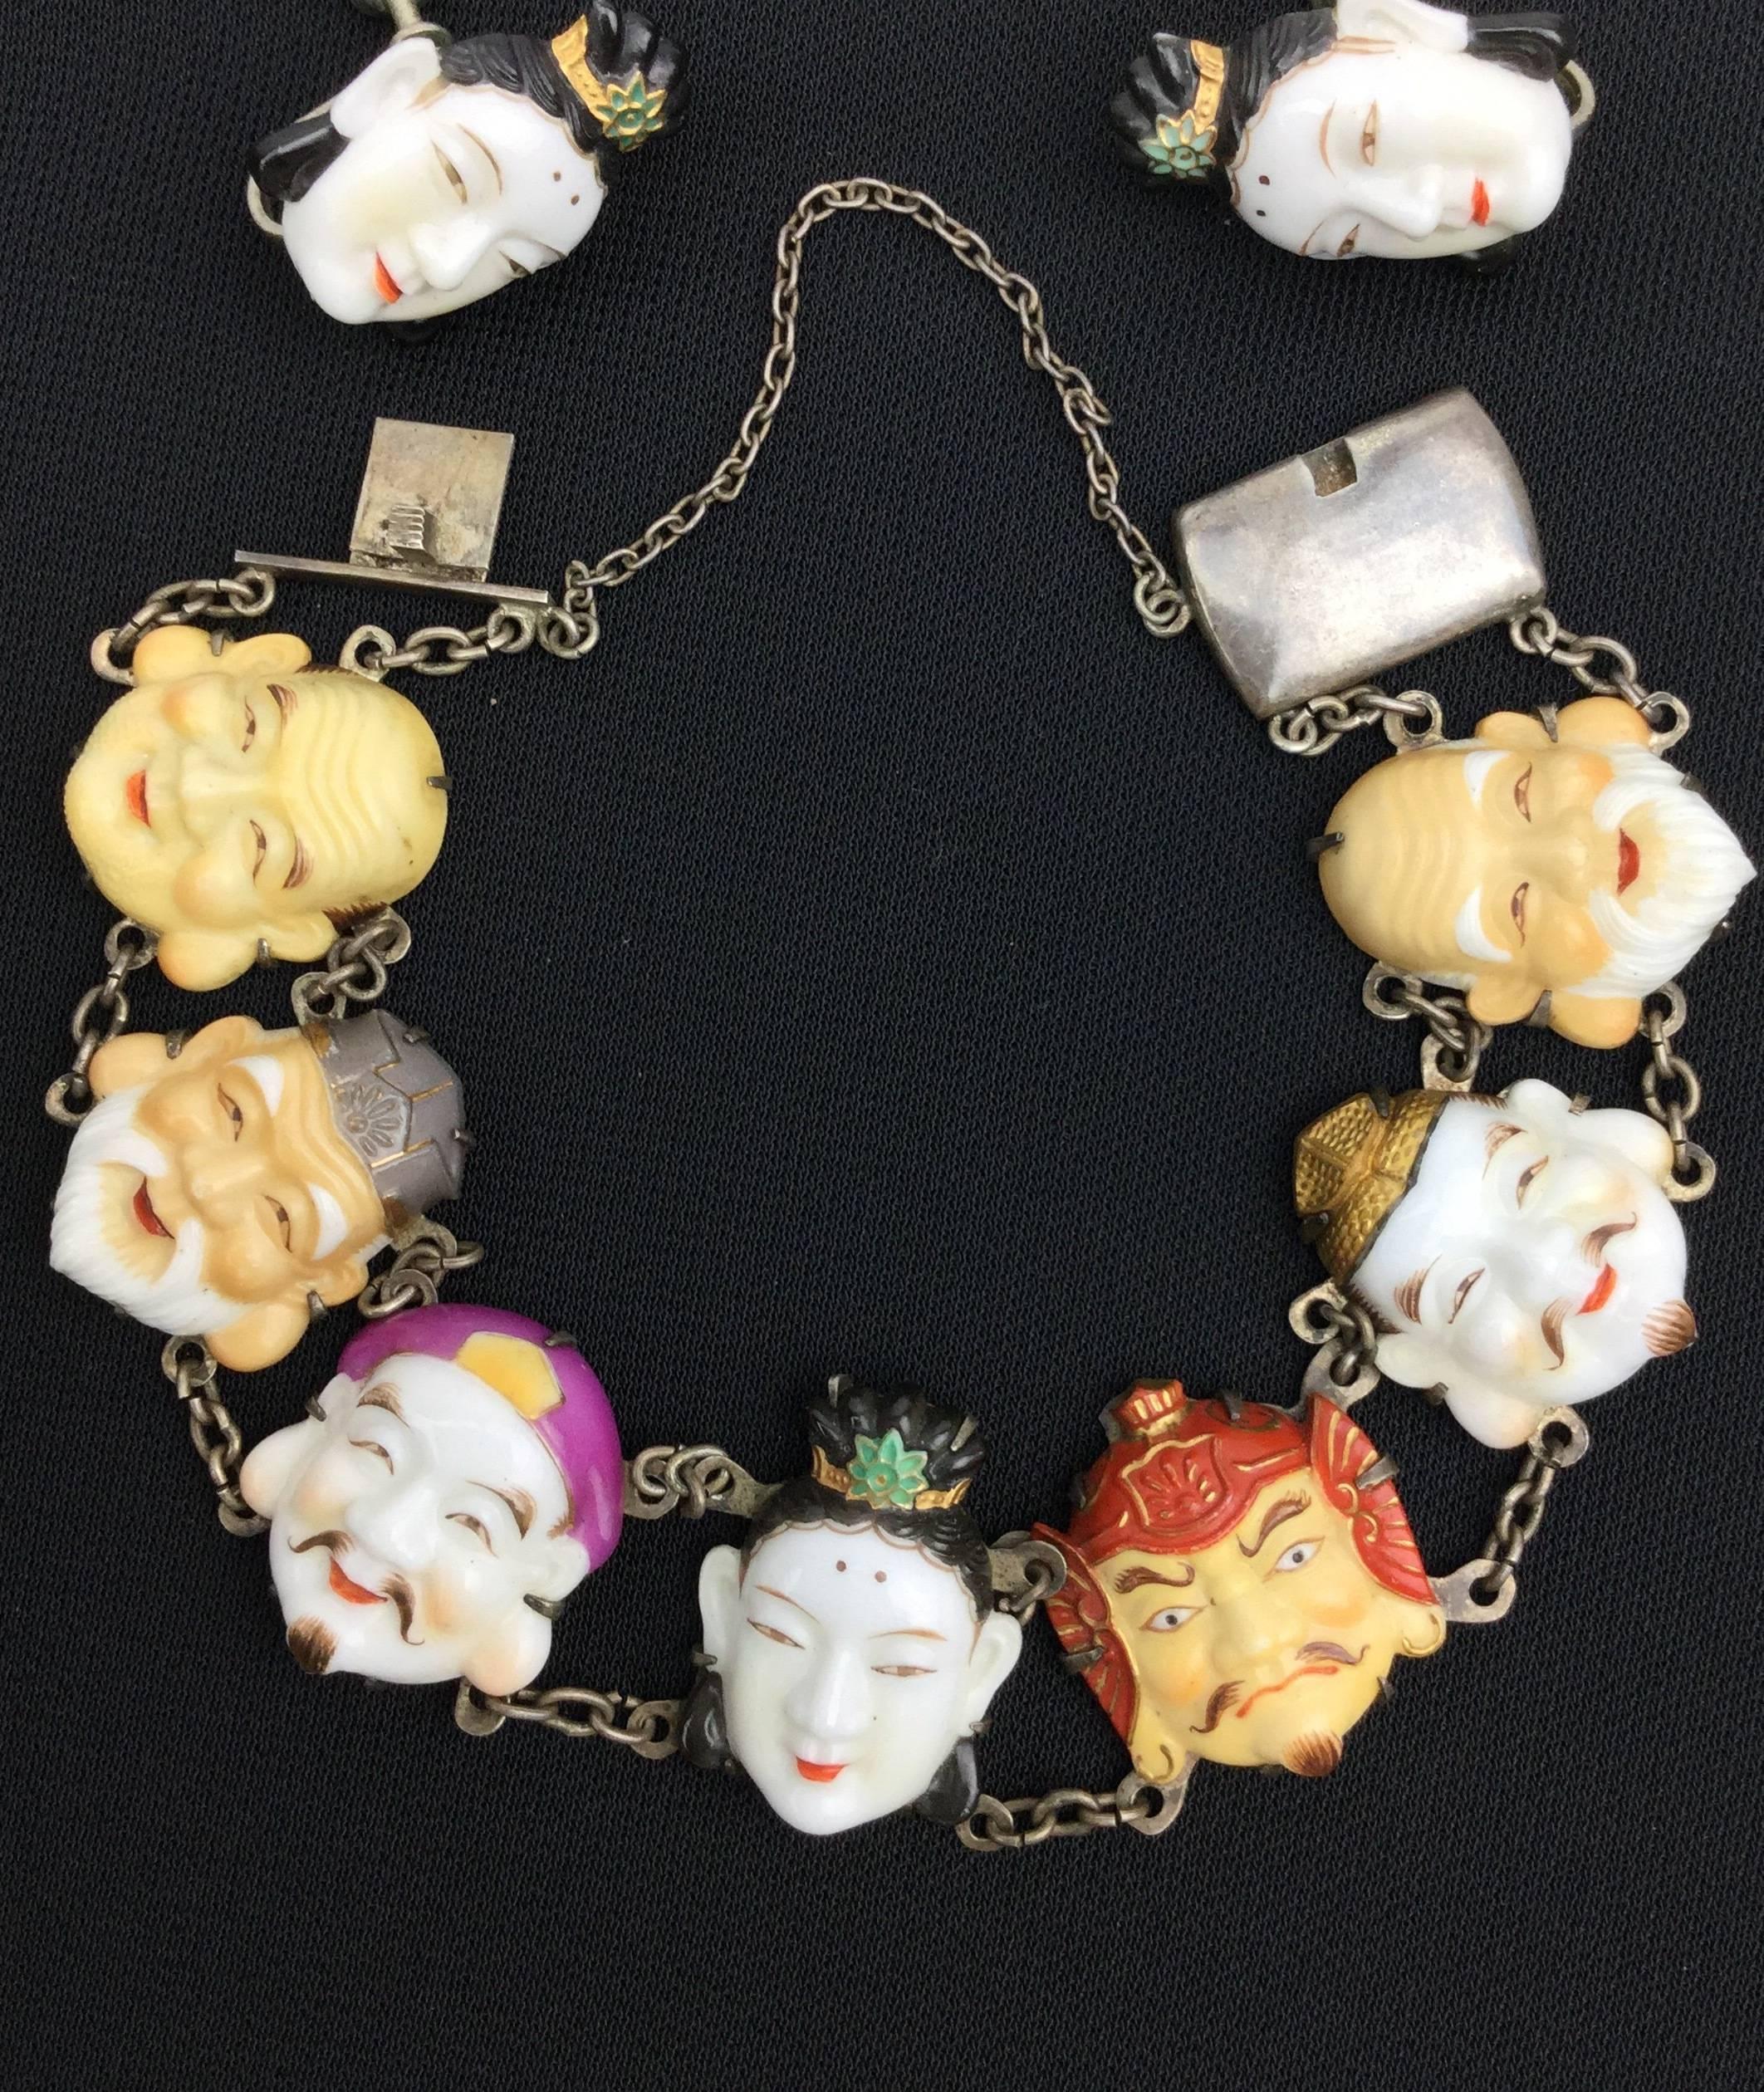 
Toshikane Seven Lucky Gods matched bracelet and earrings of porcelain faces set in silver.

The detail on each Japanese deity is just incredible!

The seven gods of fortune, or seven immortals, represented here are:

Hotei, God of abundance.